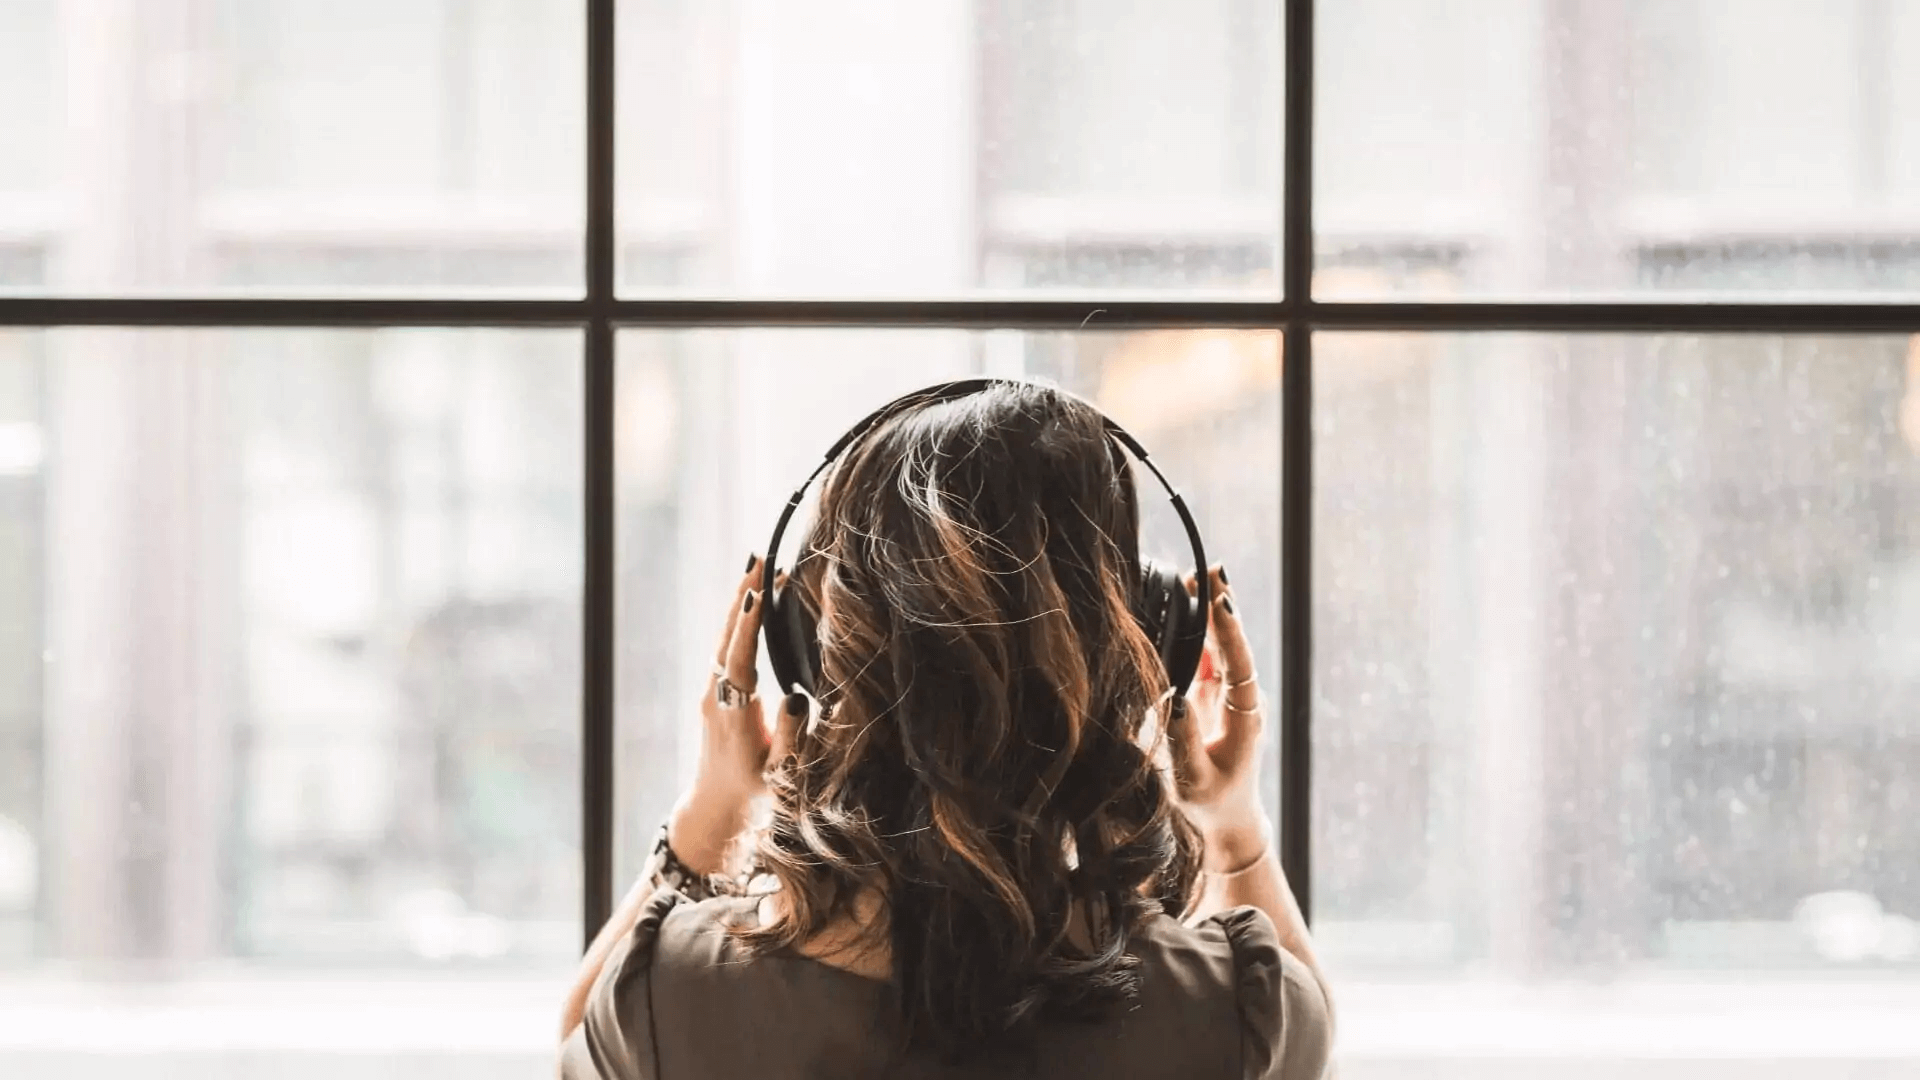 A woman wearing headphones looks out a window.